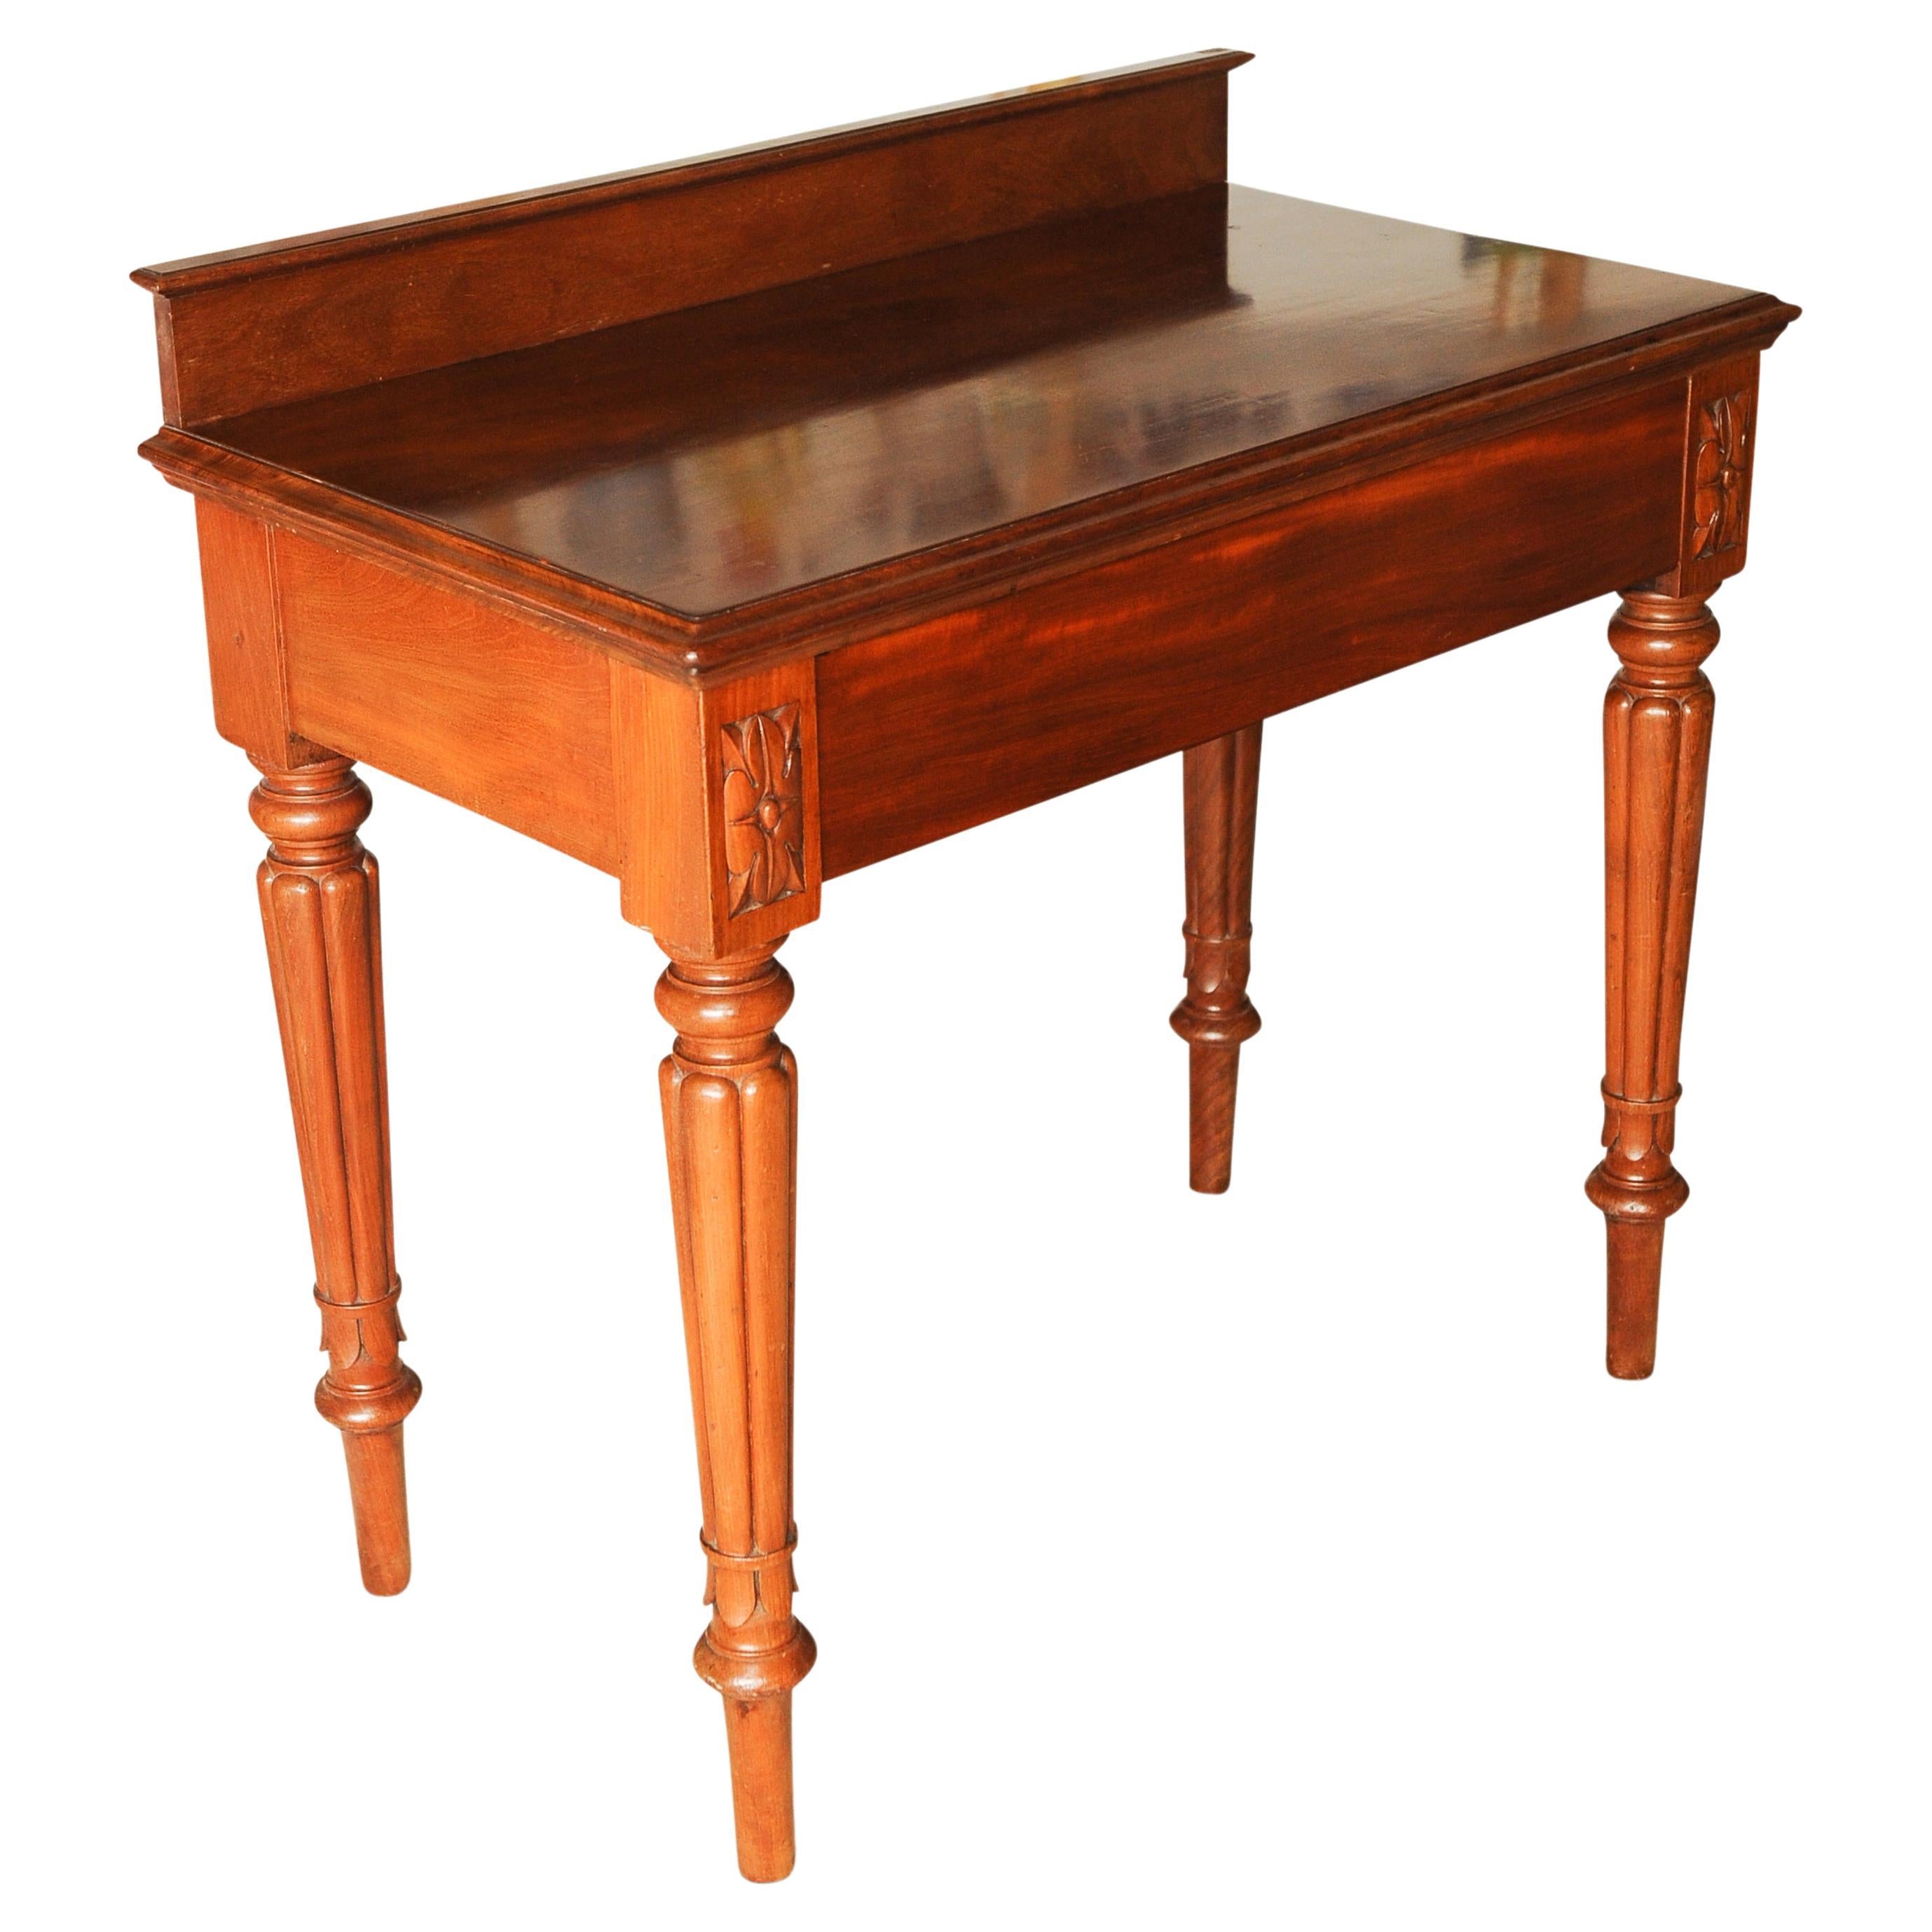 Victorian Single Drawer Hallway Console Table by Renowned London Furniture Makers Johnstone and Jeanes of New Bond Street, London W1

Makers mark stamped inside

The cabinet makers Johnstone and Jeanes produced very high quality antique furniture,